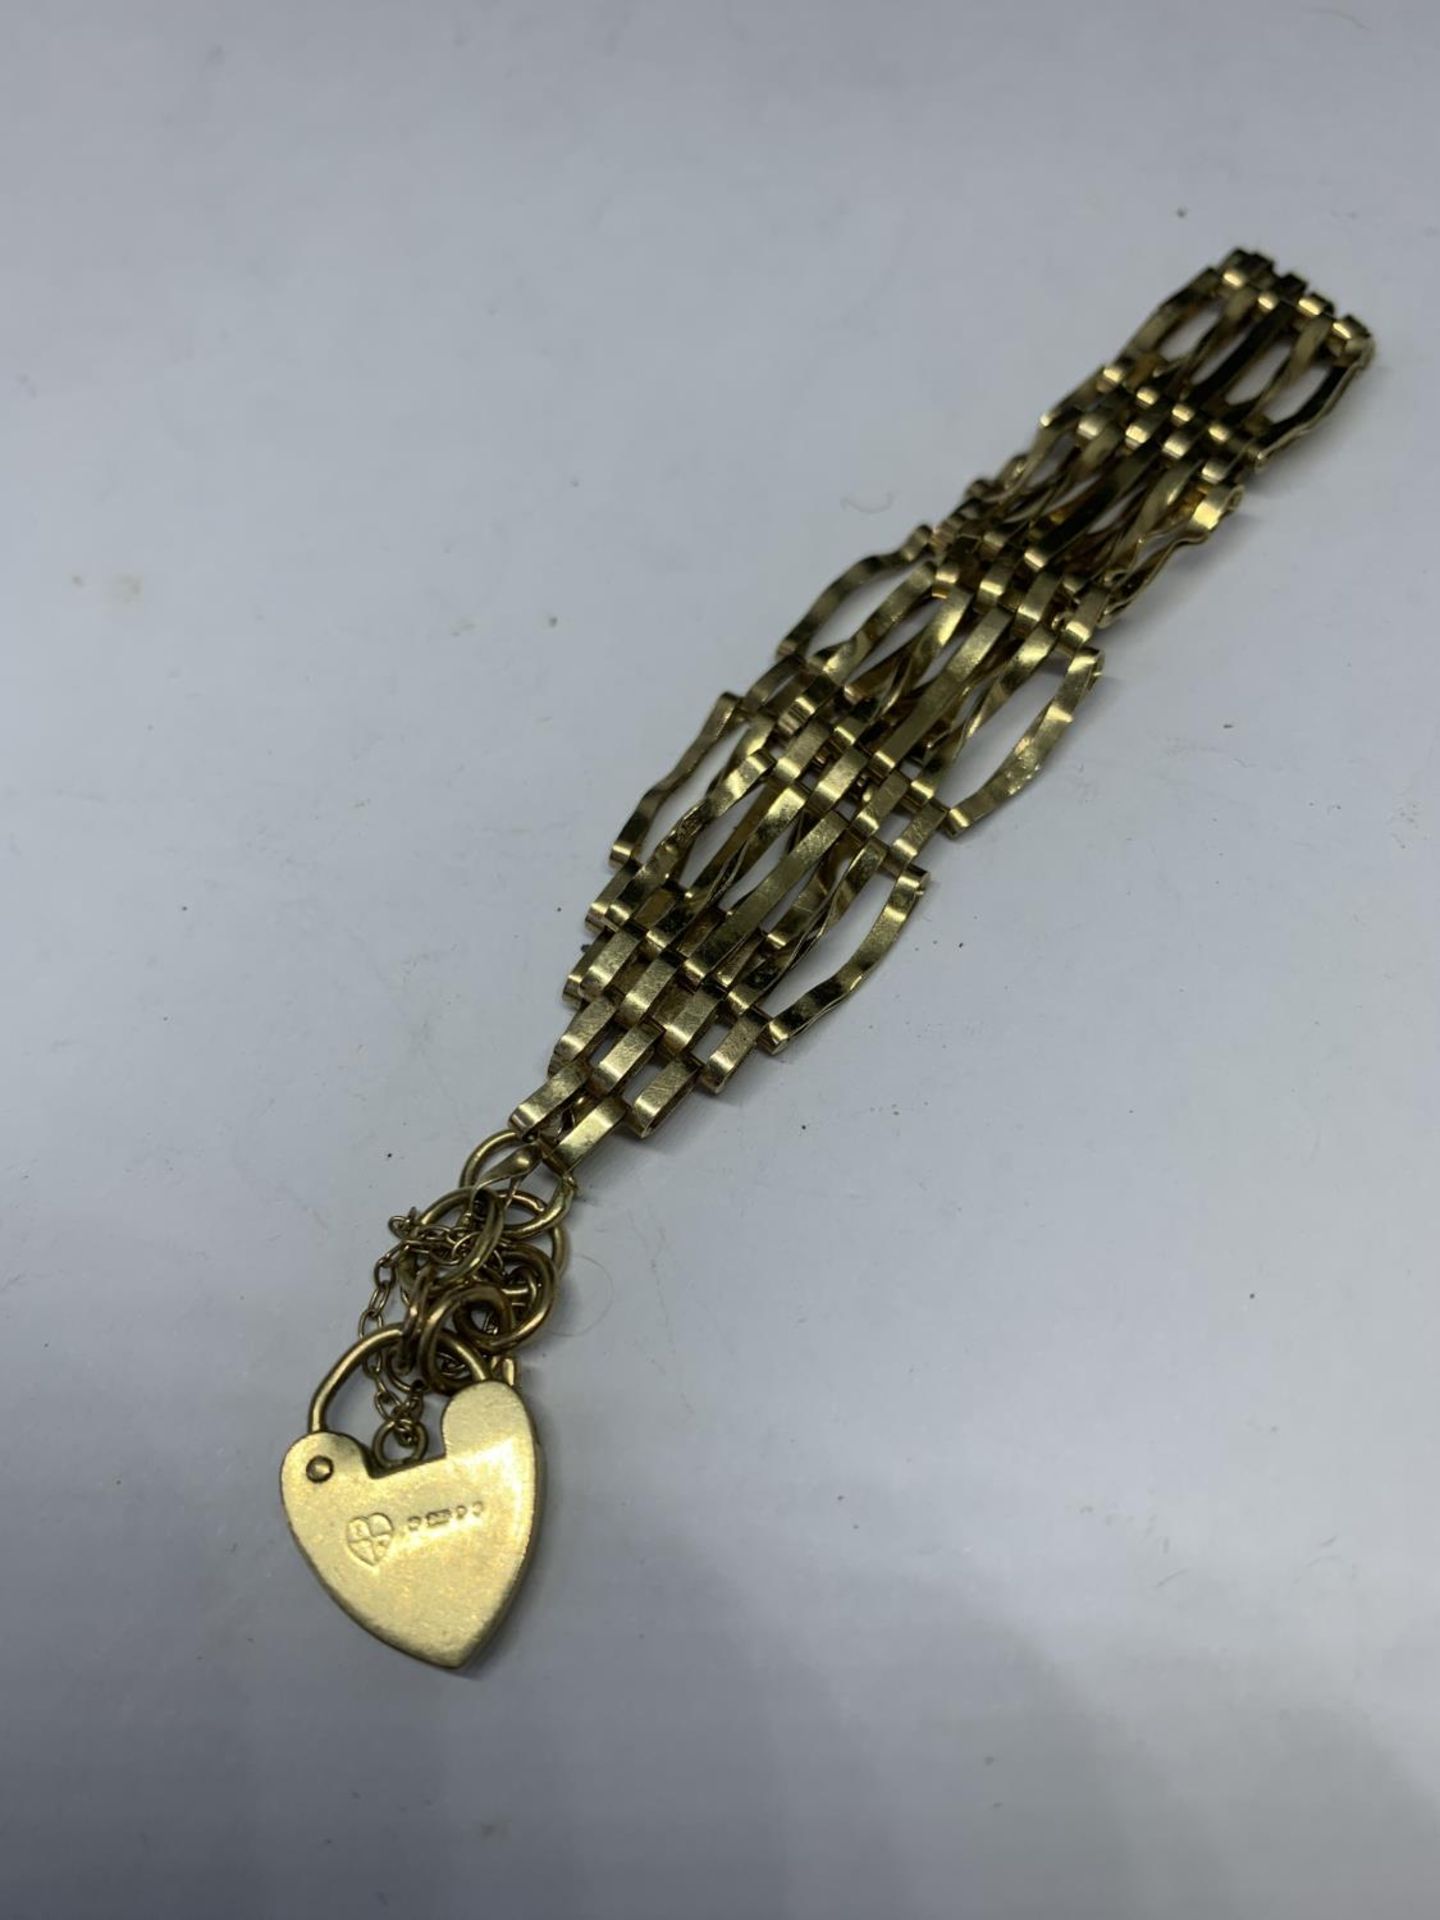 A 9 CARAT GOLD FIVE BAR GATE BRACELET WITH HEART SHAPED CLASP GROSS WEIGHT 8.95 GRAMS - Image 5 of 5